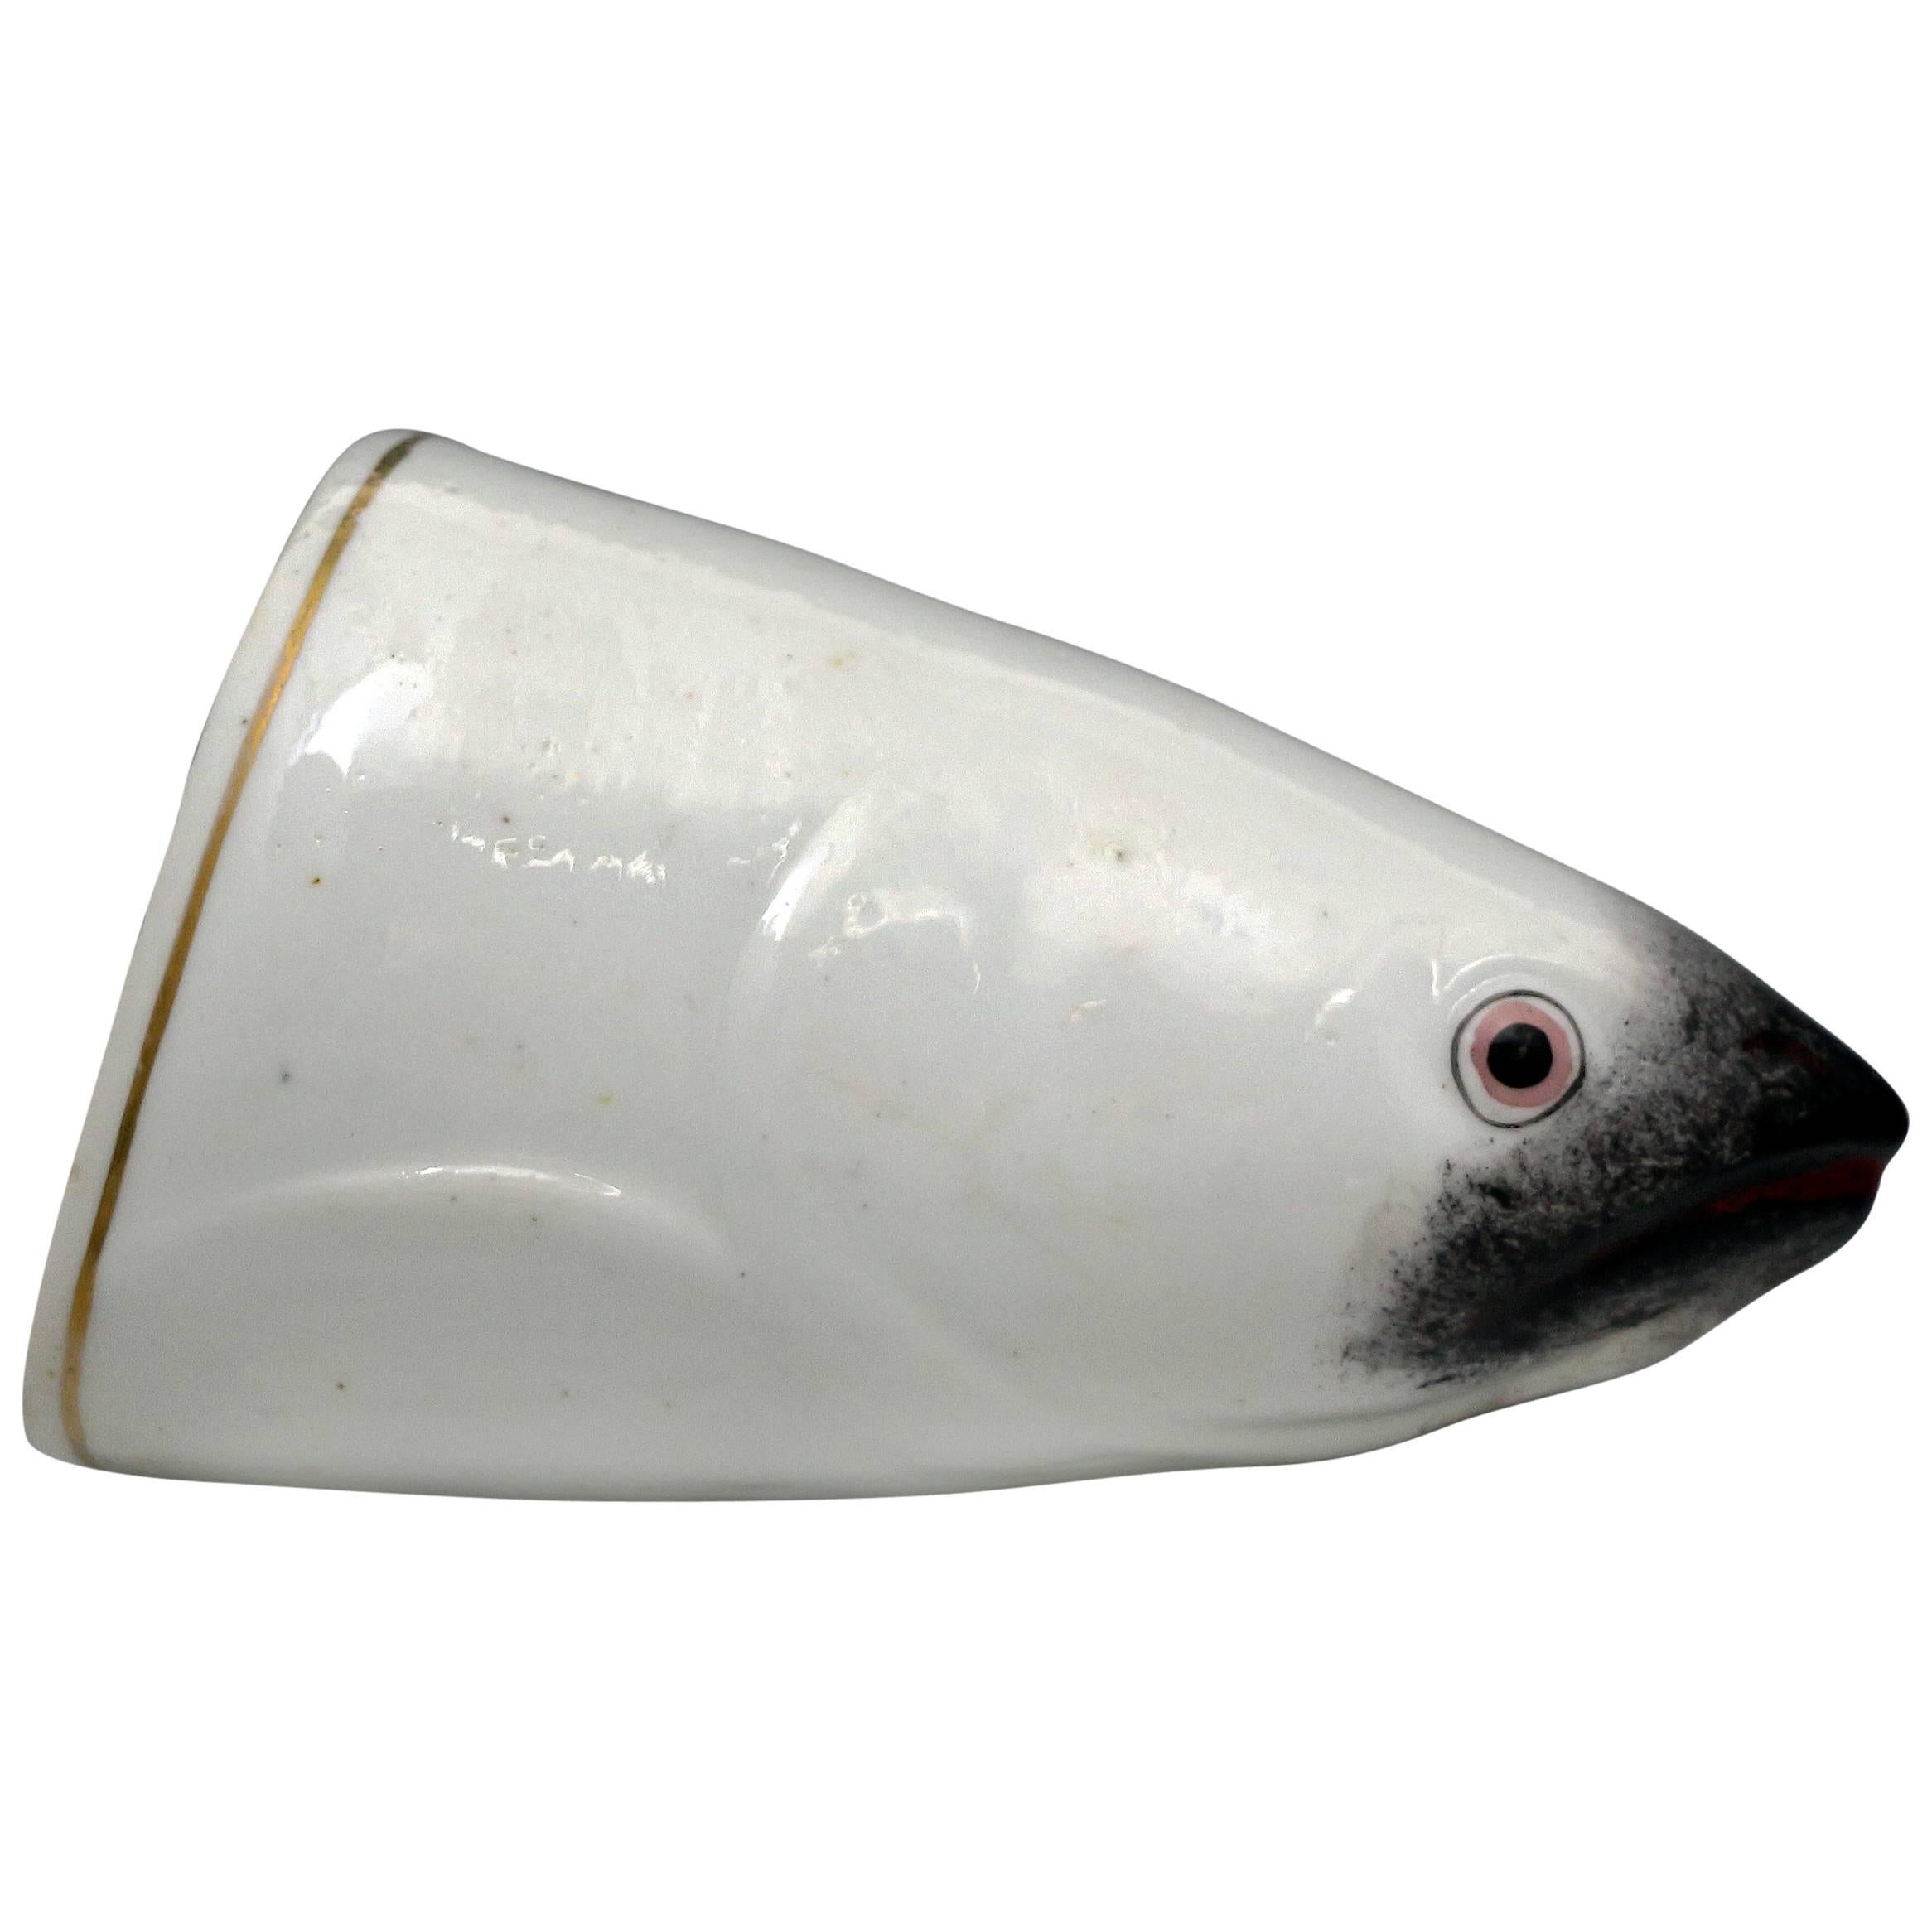 Staffordshire Porcelain Fish Head Stirrup Cup, Early 19th Century, England